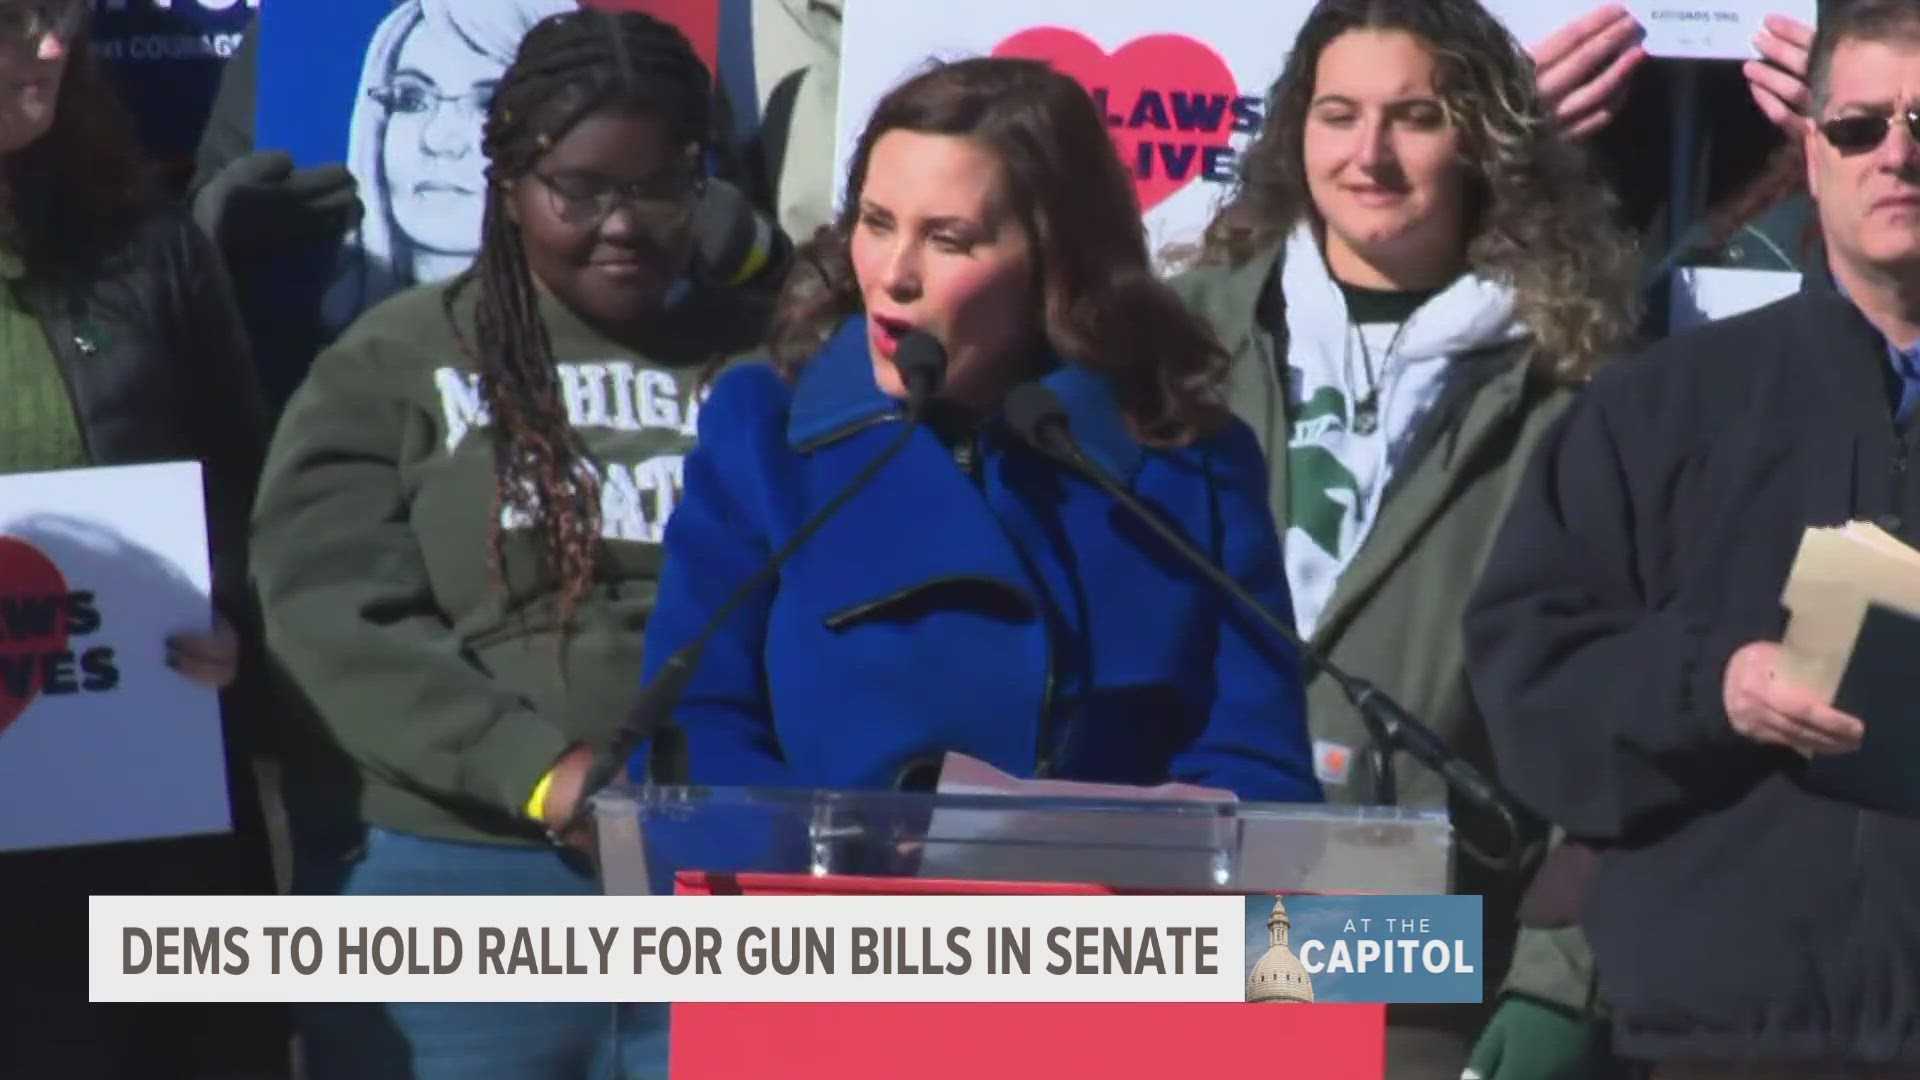 Gov. Whitmer was joined by Attorney General Dana Nessel, former Congresswoman Gabby Giffords, Rep. Elissa Slotkin, faith leaders and other advocates.